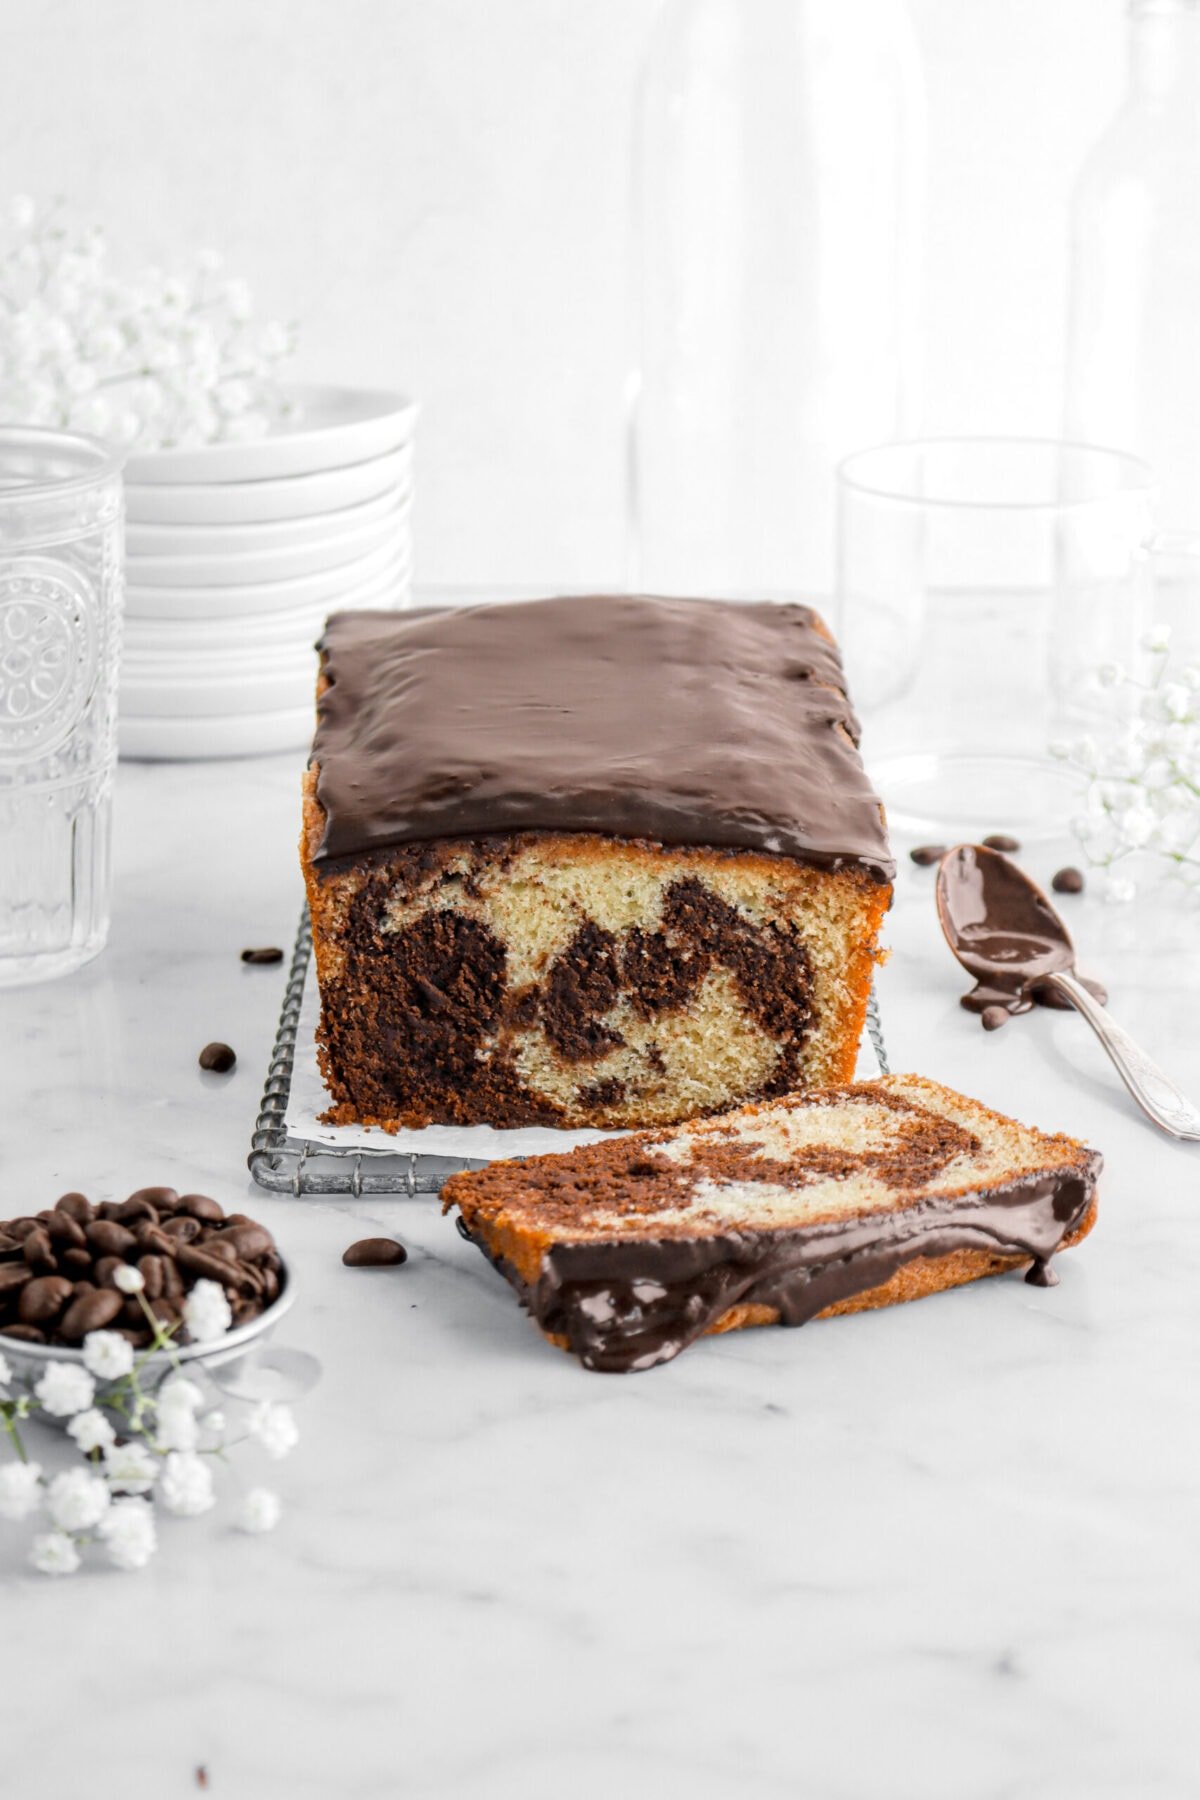 marble loaf cake on small wire tray with slice laying in front, measuring cup of coffee beans and spoonful of chocolate glaze beside with flowers around on marble surface.